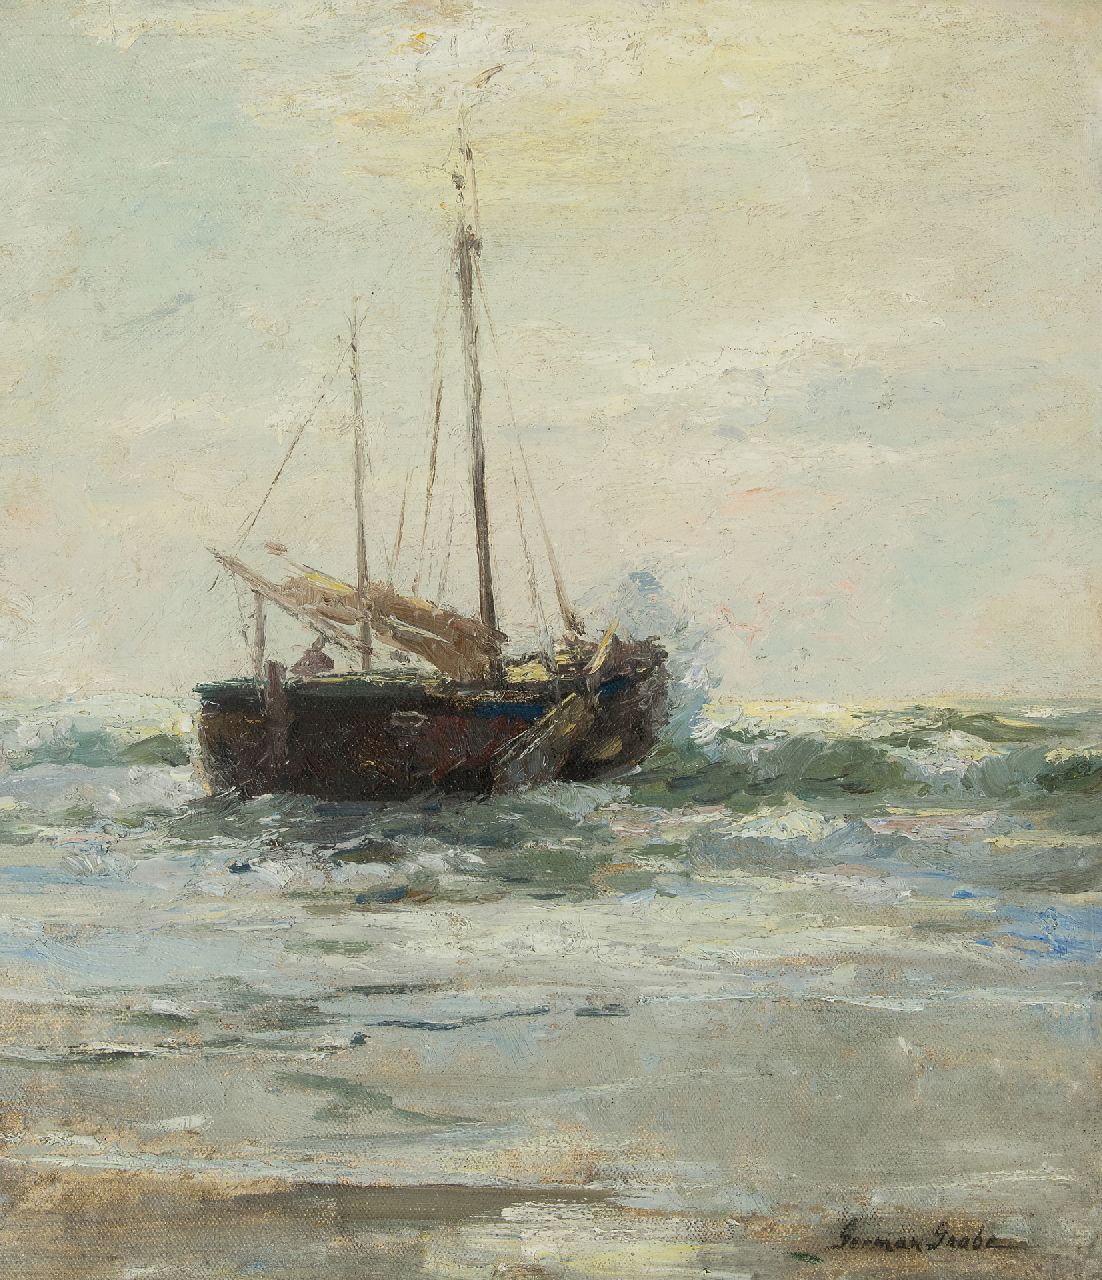 Grobe P.G.  | Philipp 'German' Grobe | Paintings offered for sale | A fishing vesselin the surf, Katwijk, oil on canvas laid down on panel 46.4 x 40.5 cm, signed l.r.